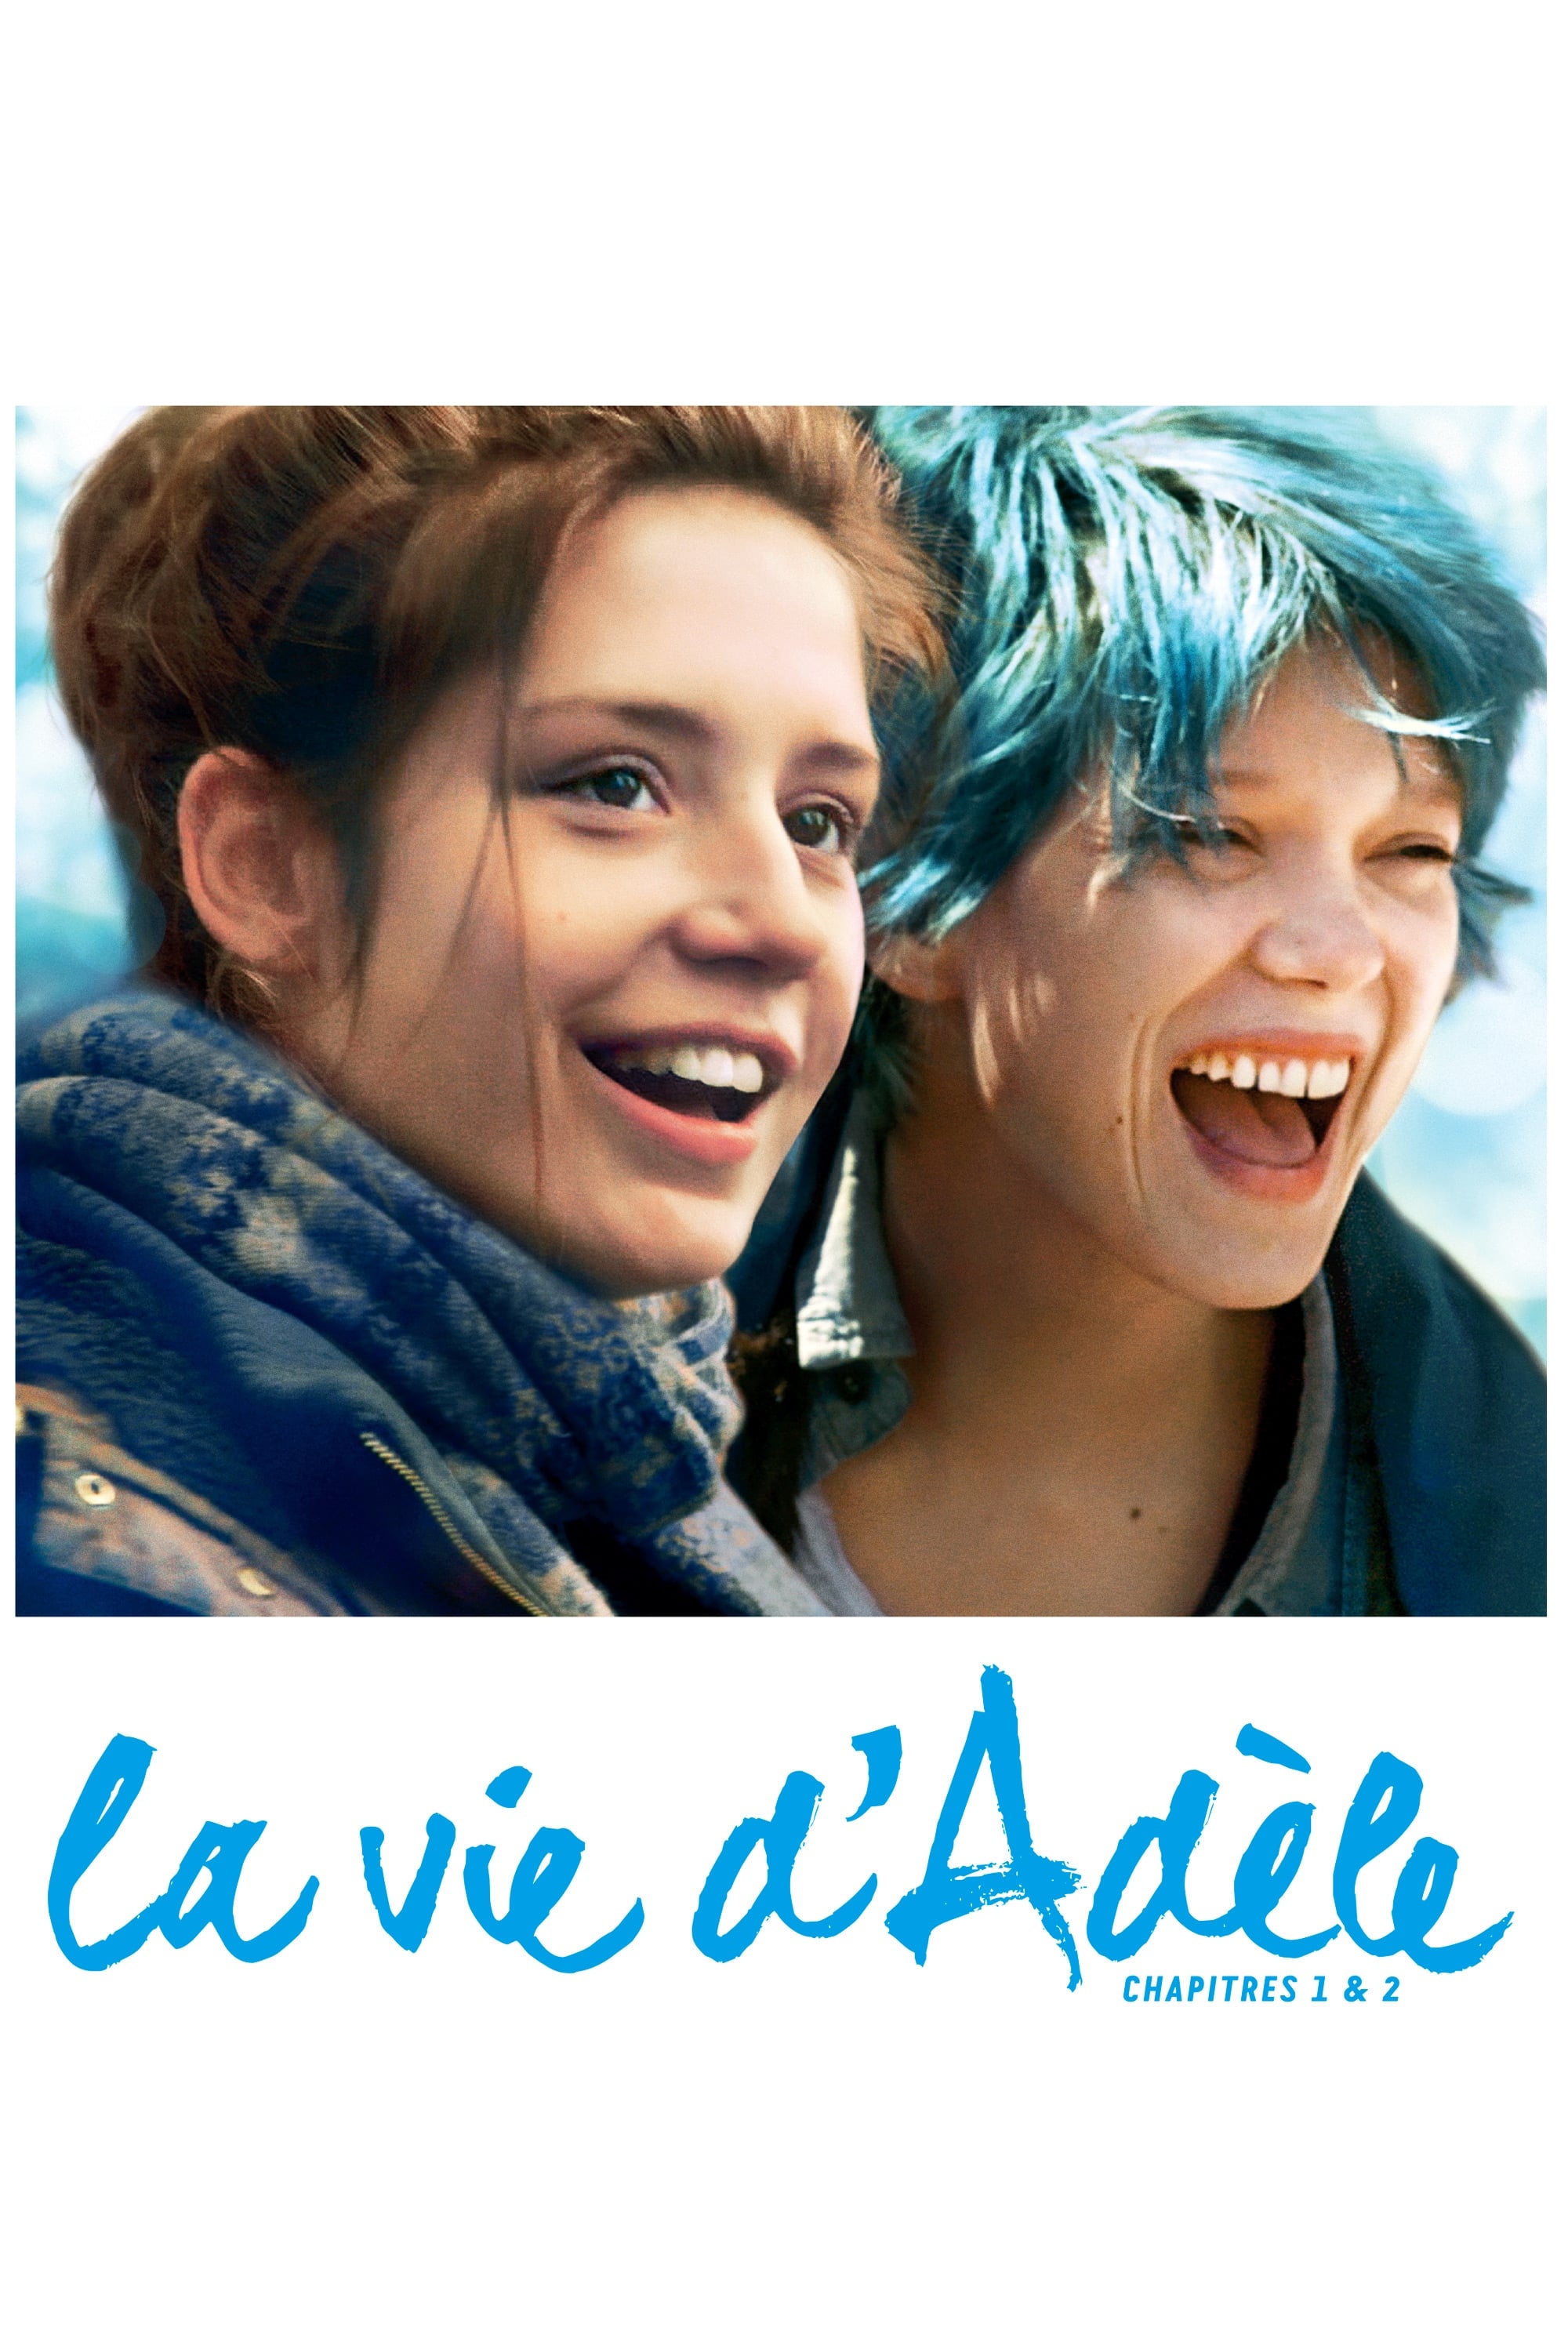 Màu Xanh Nồng Ấm (Blue Is the Warmest Color) [2013]